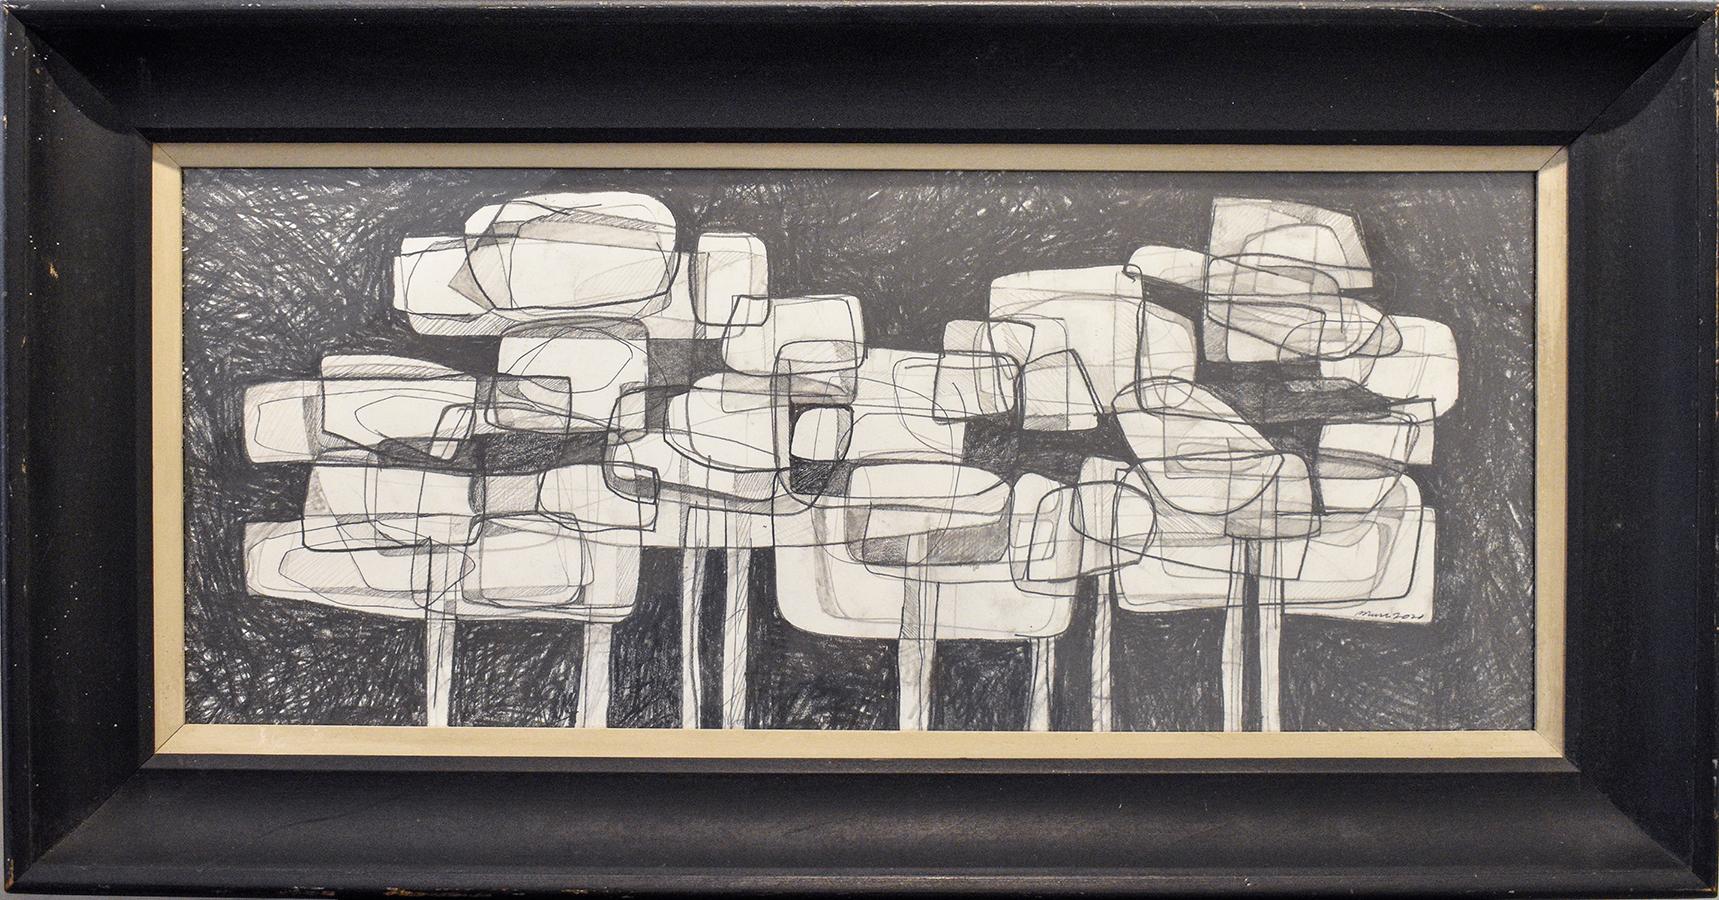 David Dew Bruner Figurative Art - Waterlilies 22 (Abstract Figurative Graphite Drawing in Antique Black Frame)